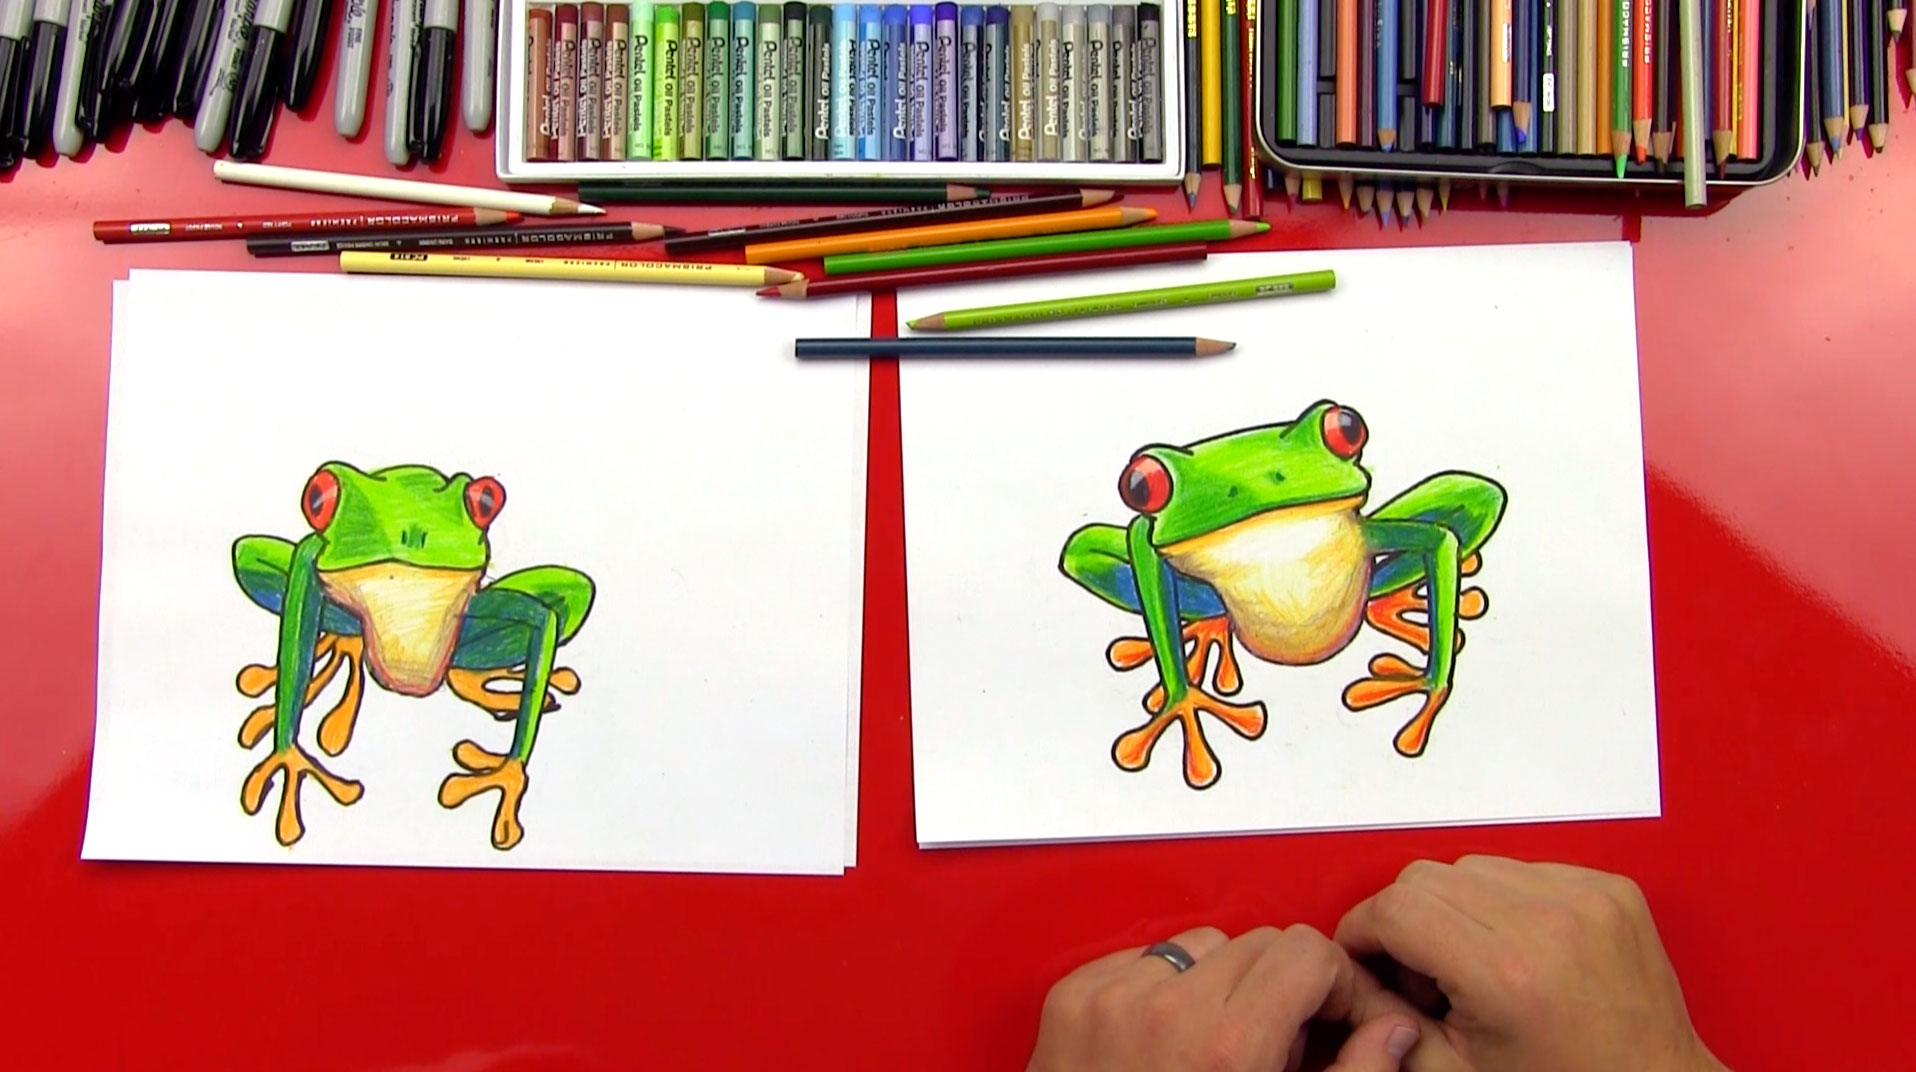 how to draw a tree frog step by step